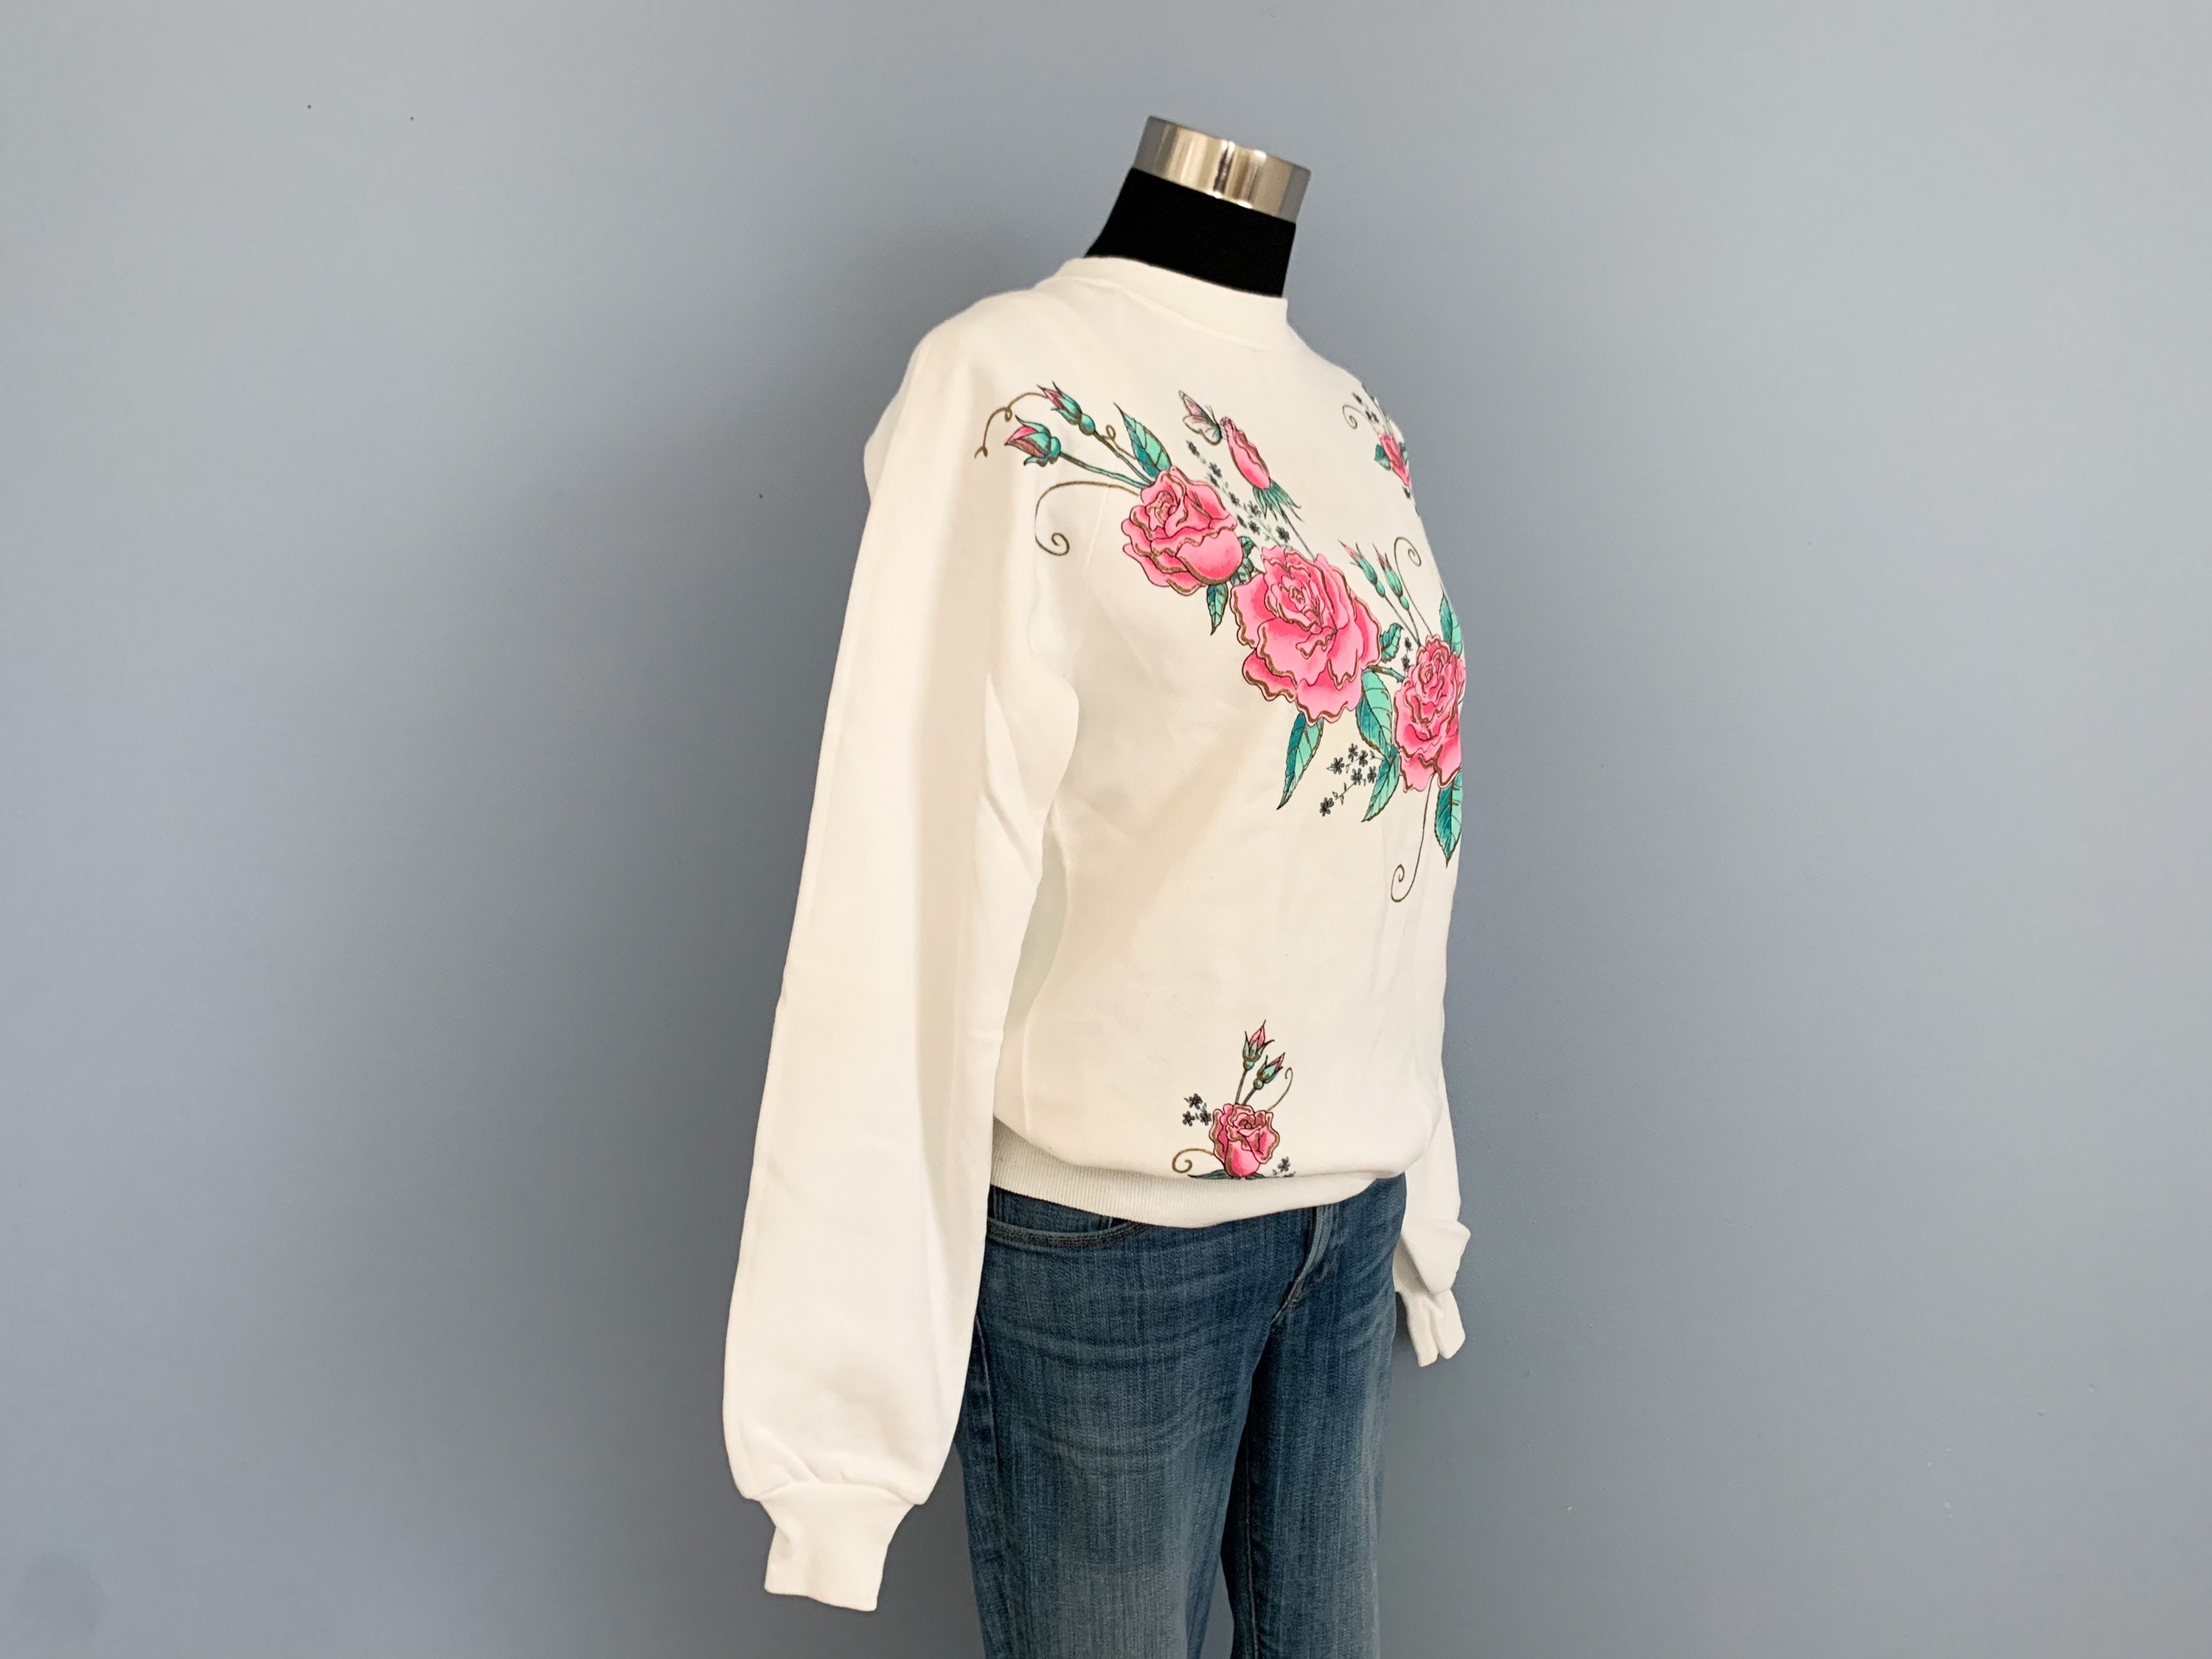 Vintage 90s Floral Sweatshirt 1990s Jerzees Pullover With - Etsy